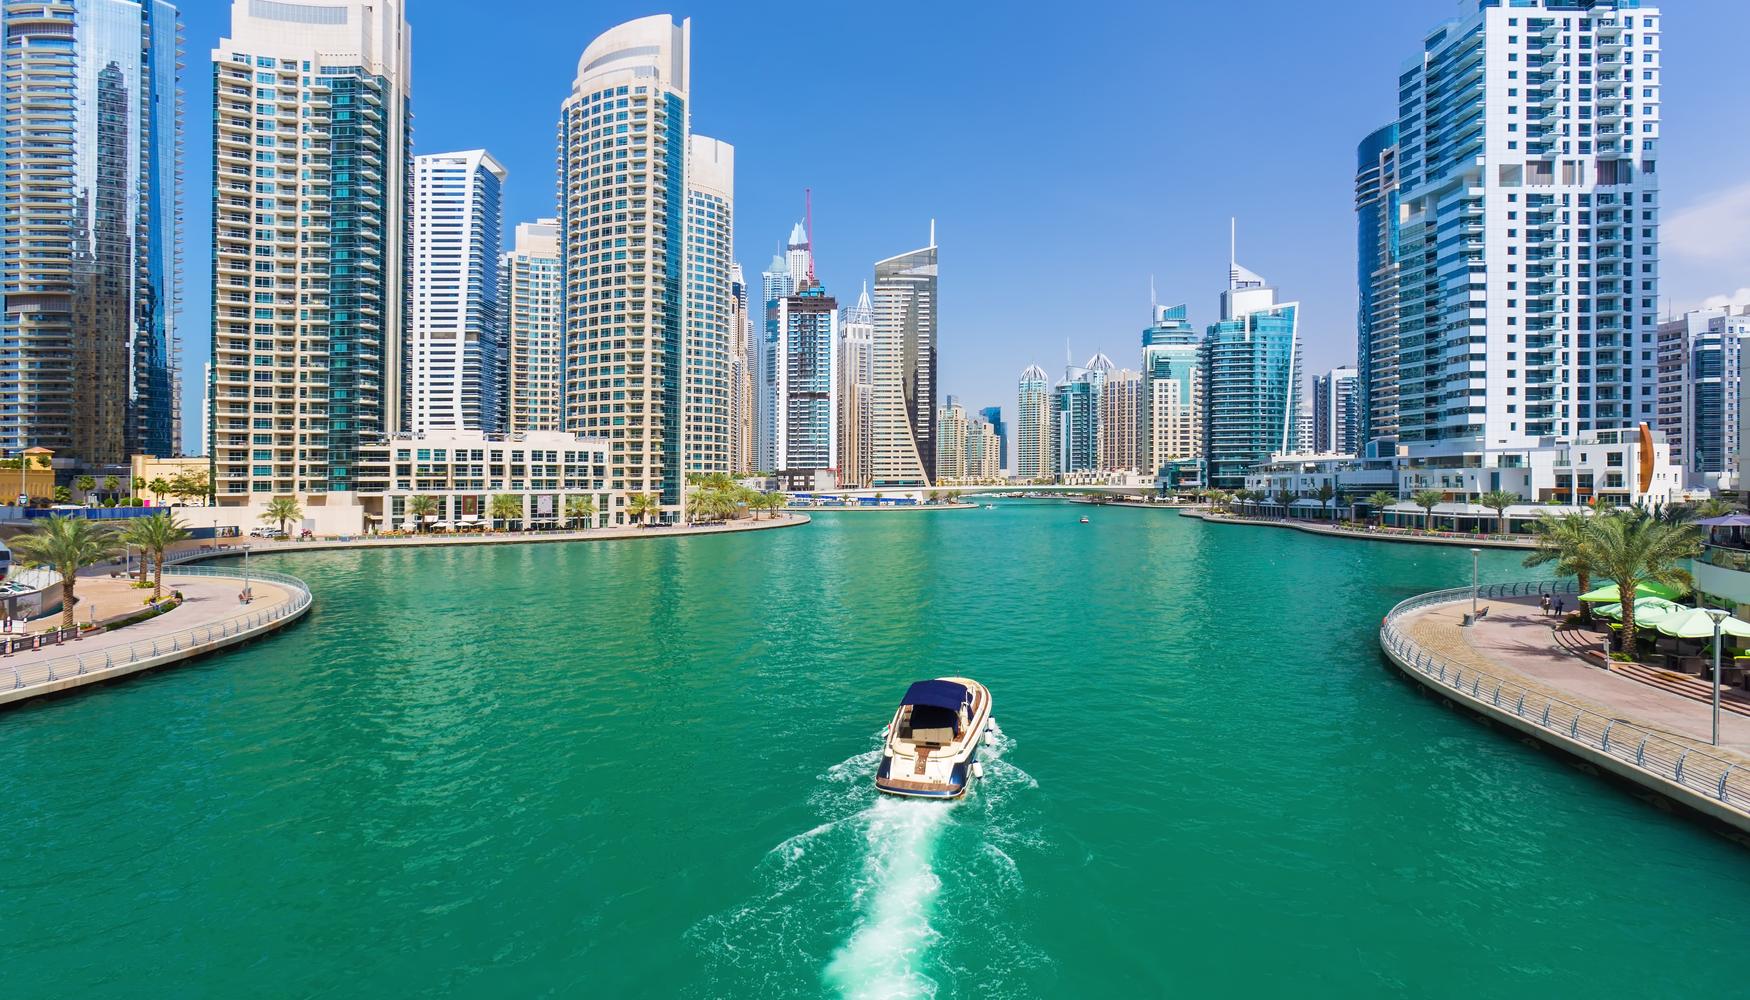 Dubai Vacation Packages from 1,363 Search Flight+Hotel on KAYAK